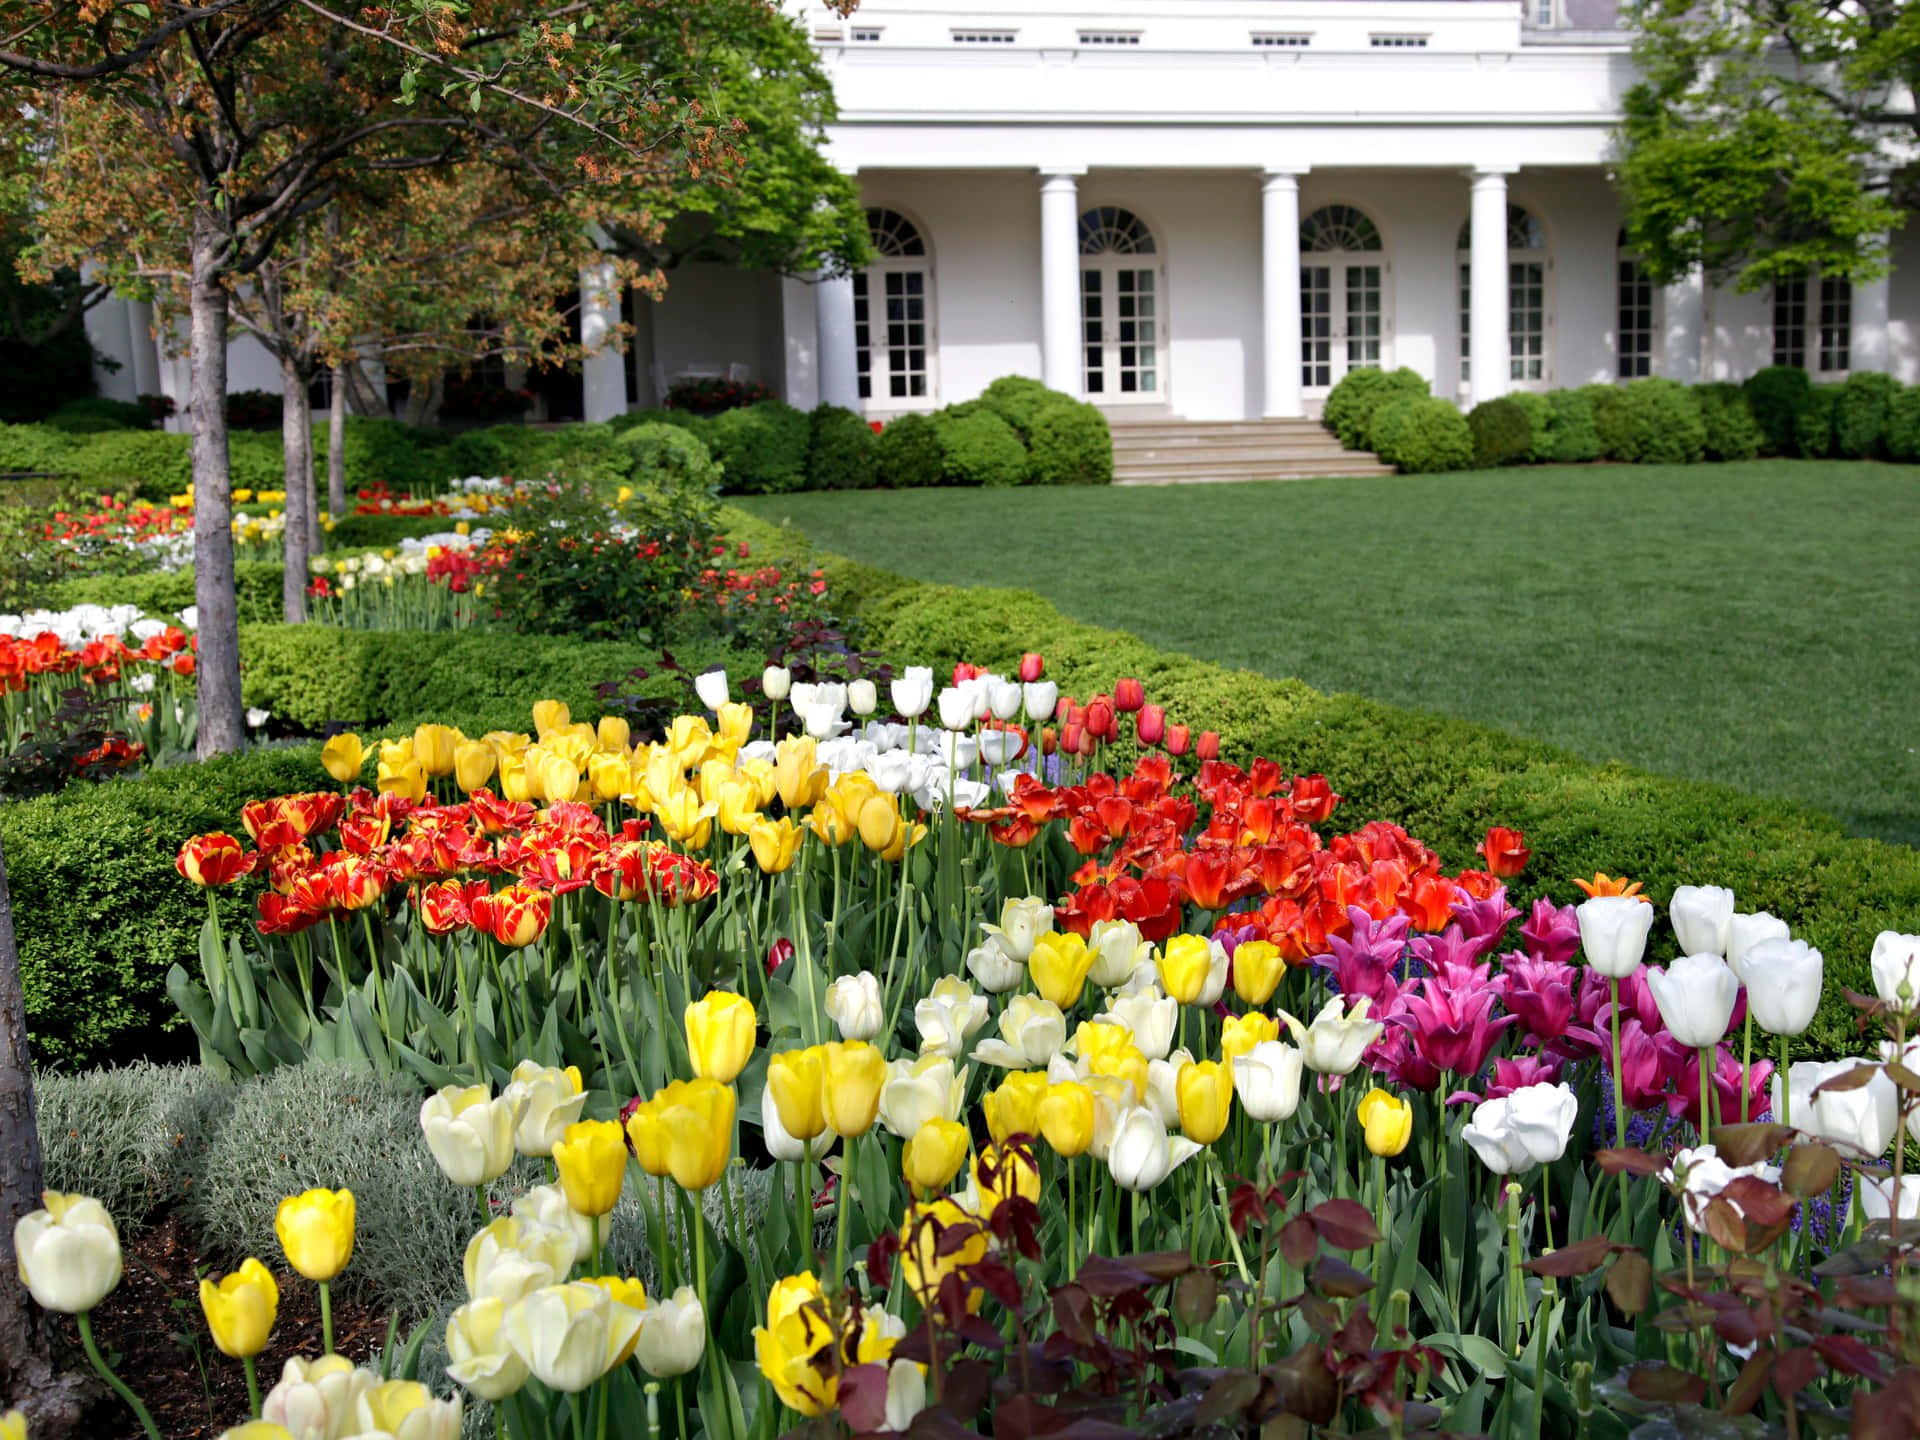 An aerial view of the White House Rose Garden in Washington, D.C.